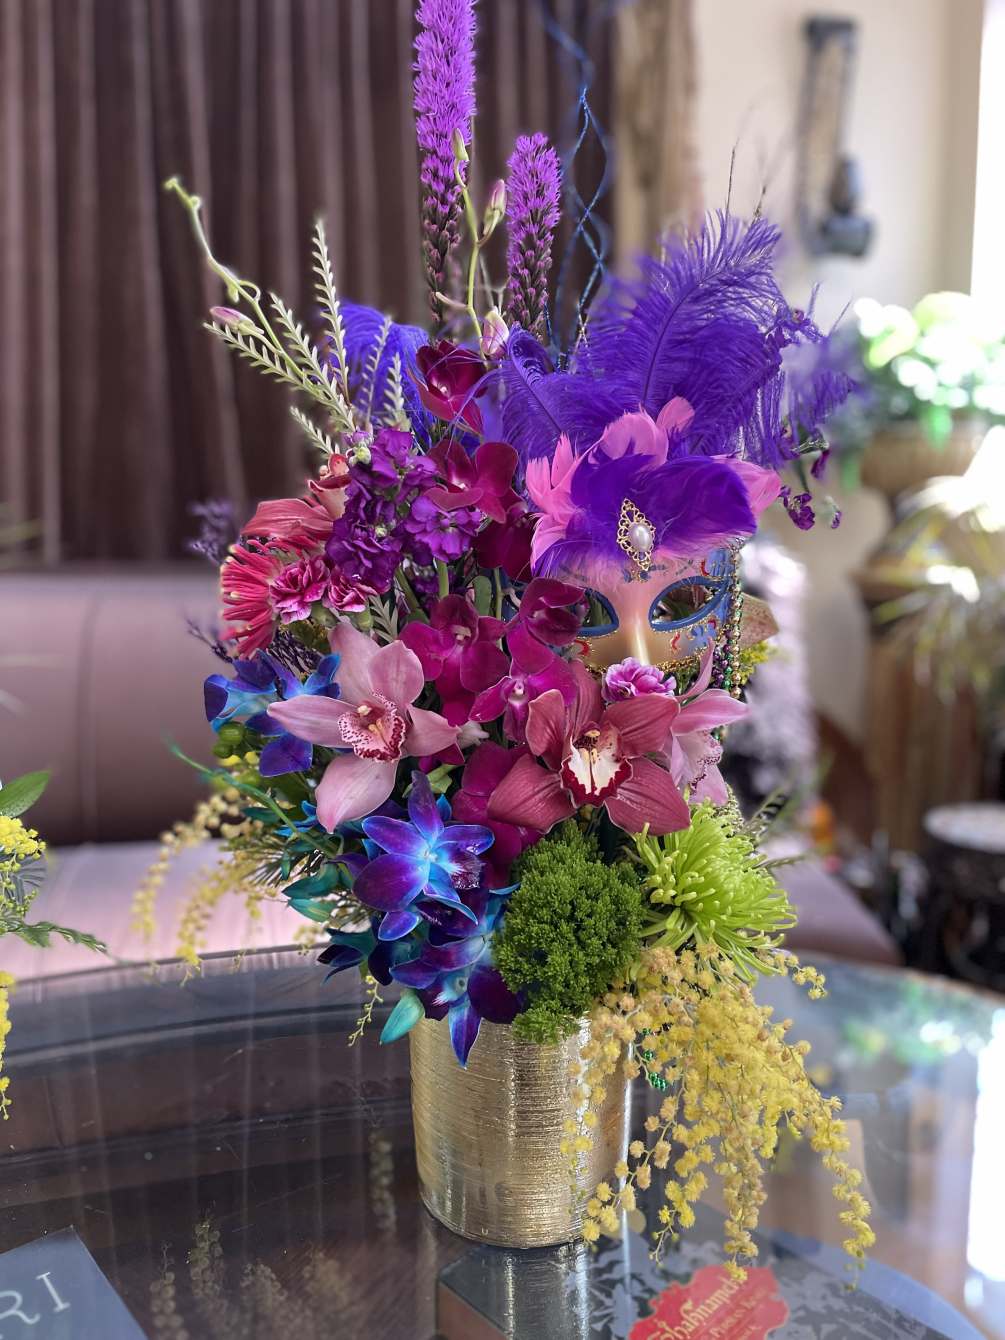 Choice of 1 centerpiece, or 4 cocktail table floral centerpieces. The Mardi